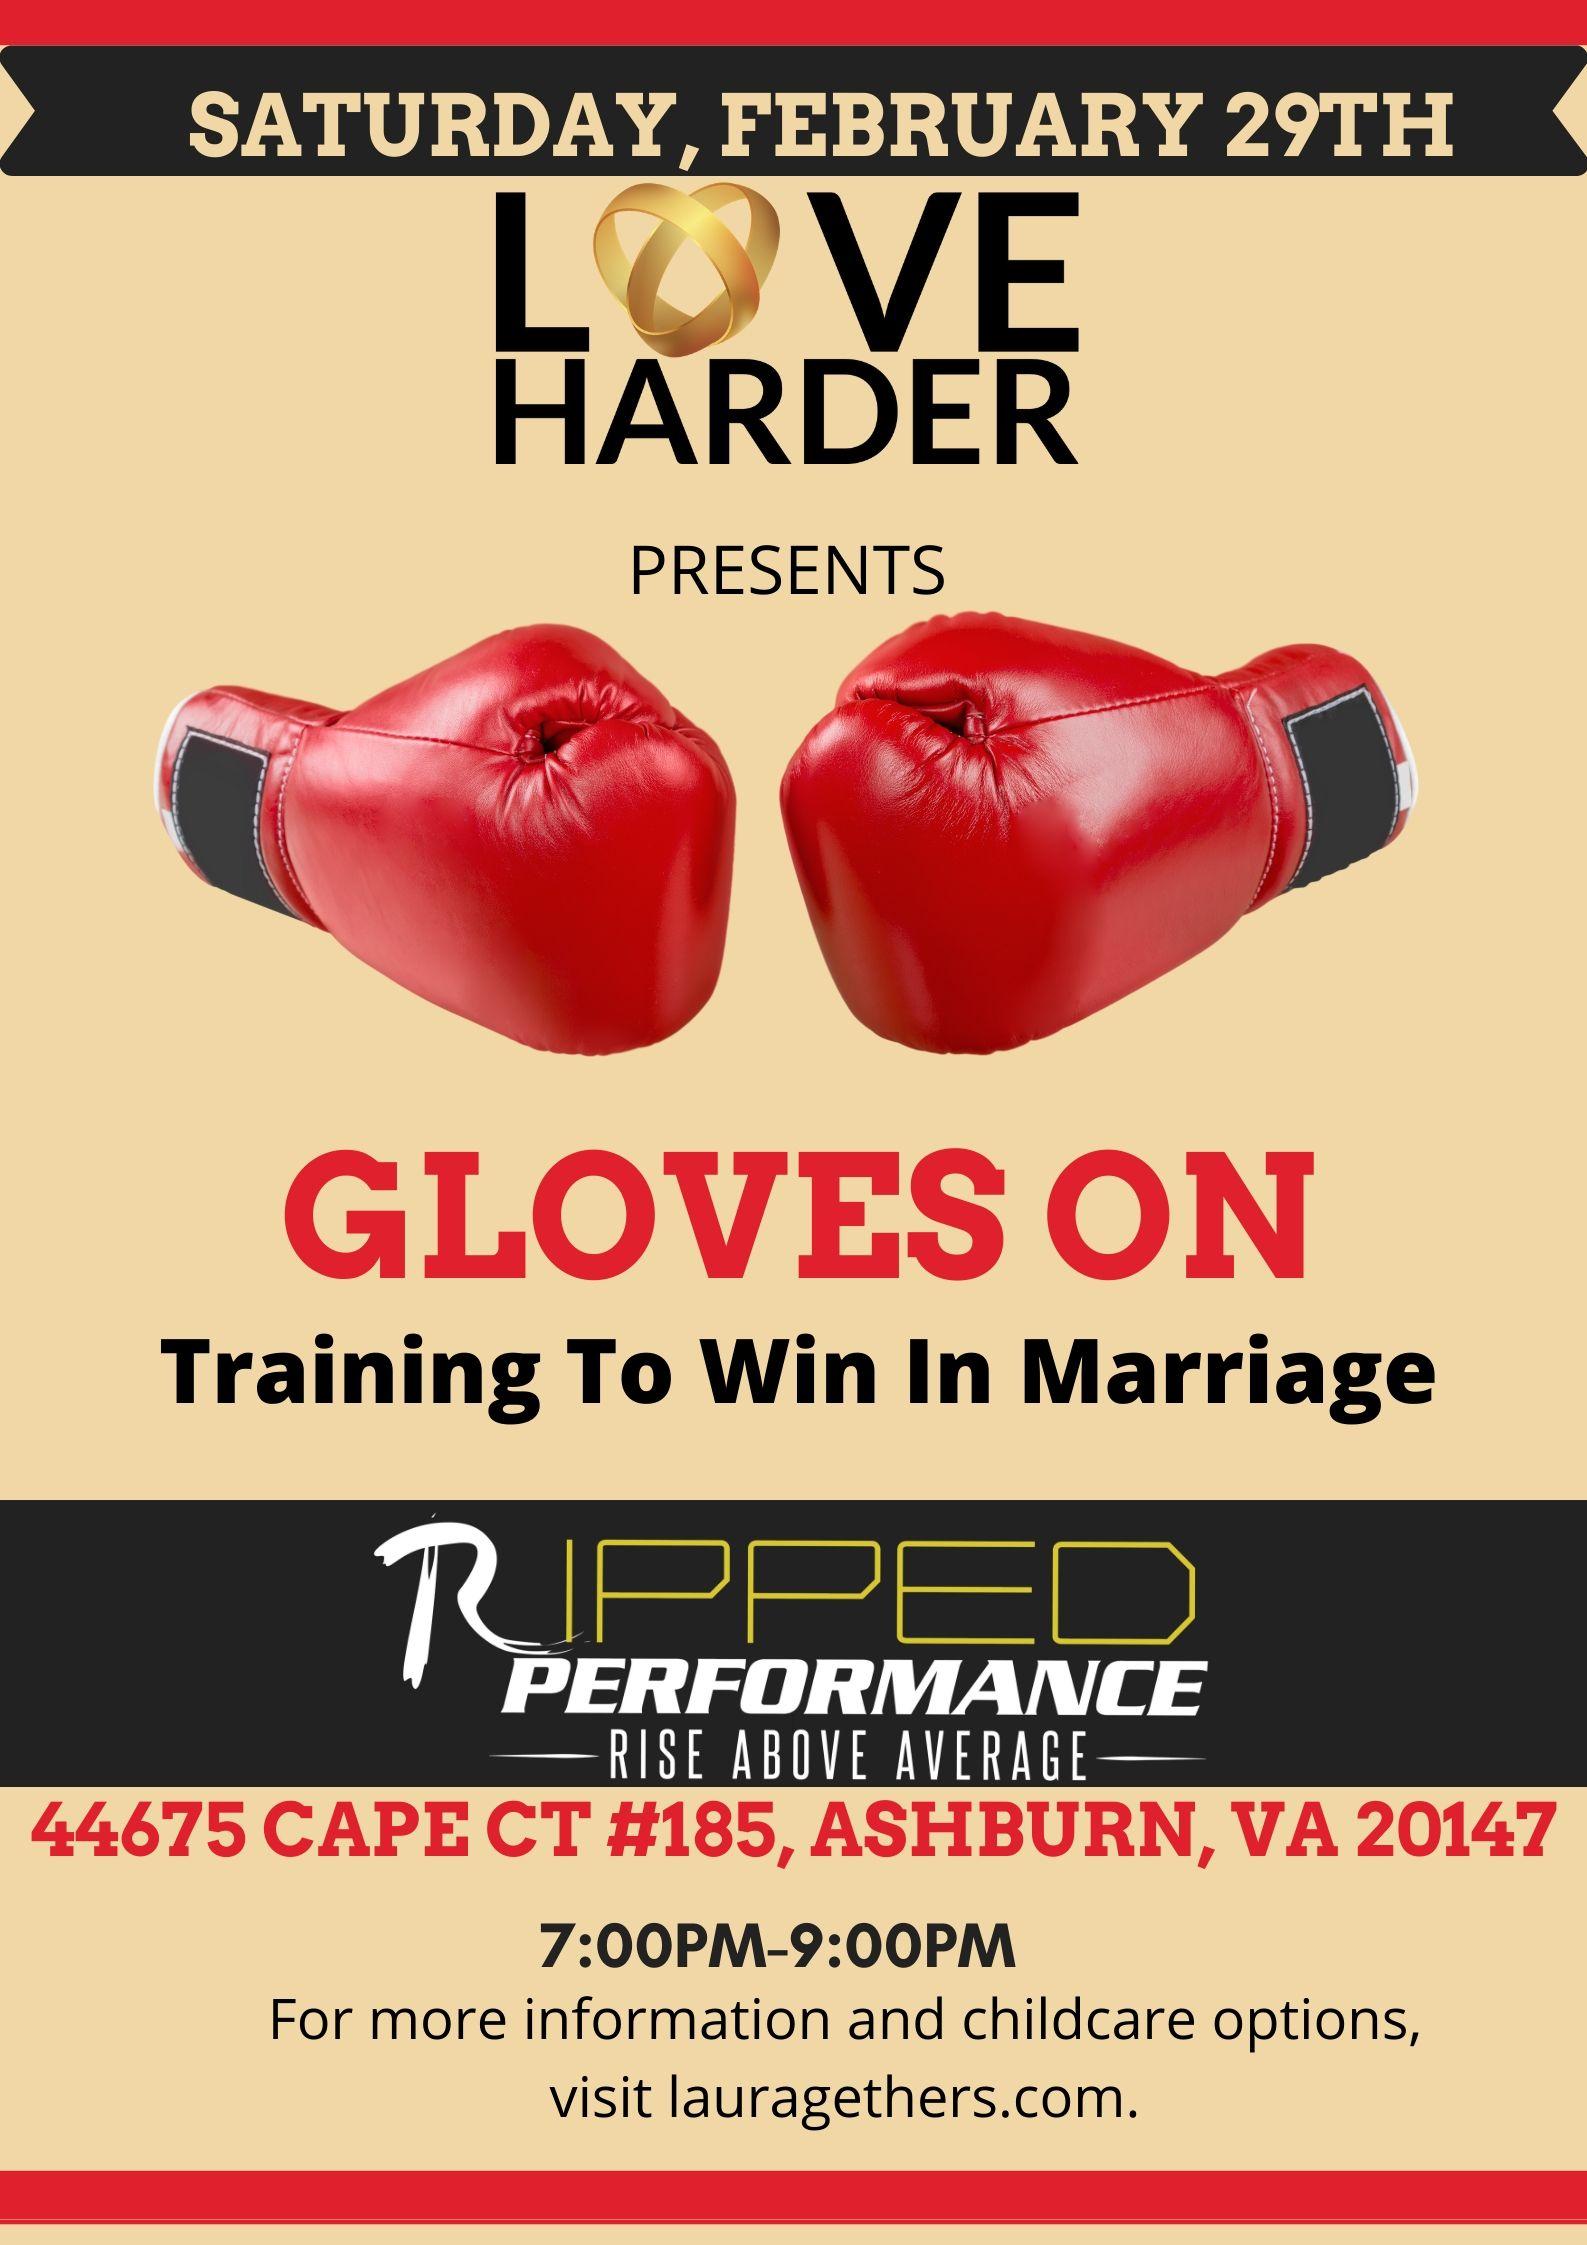 Gloves On, Training to Win in Marriage